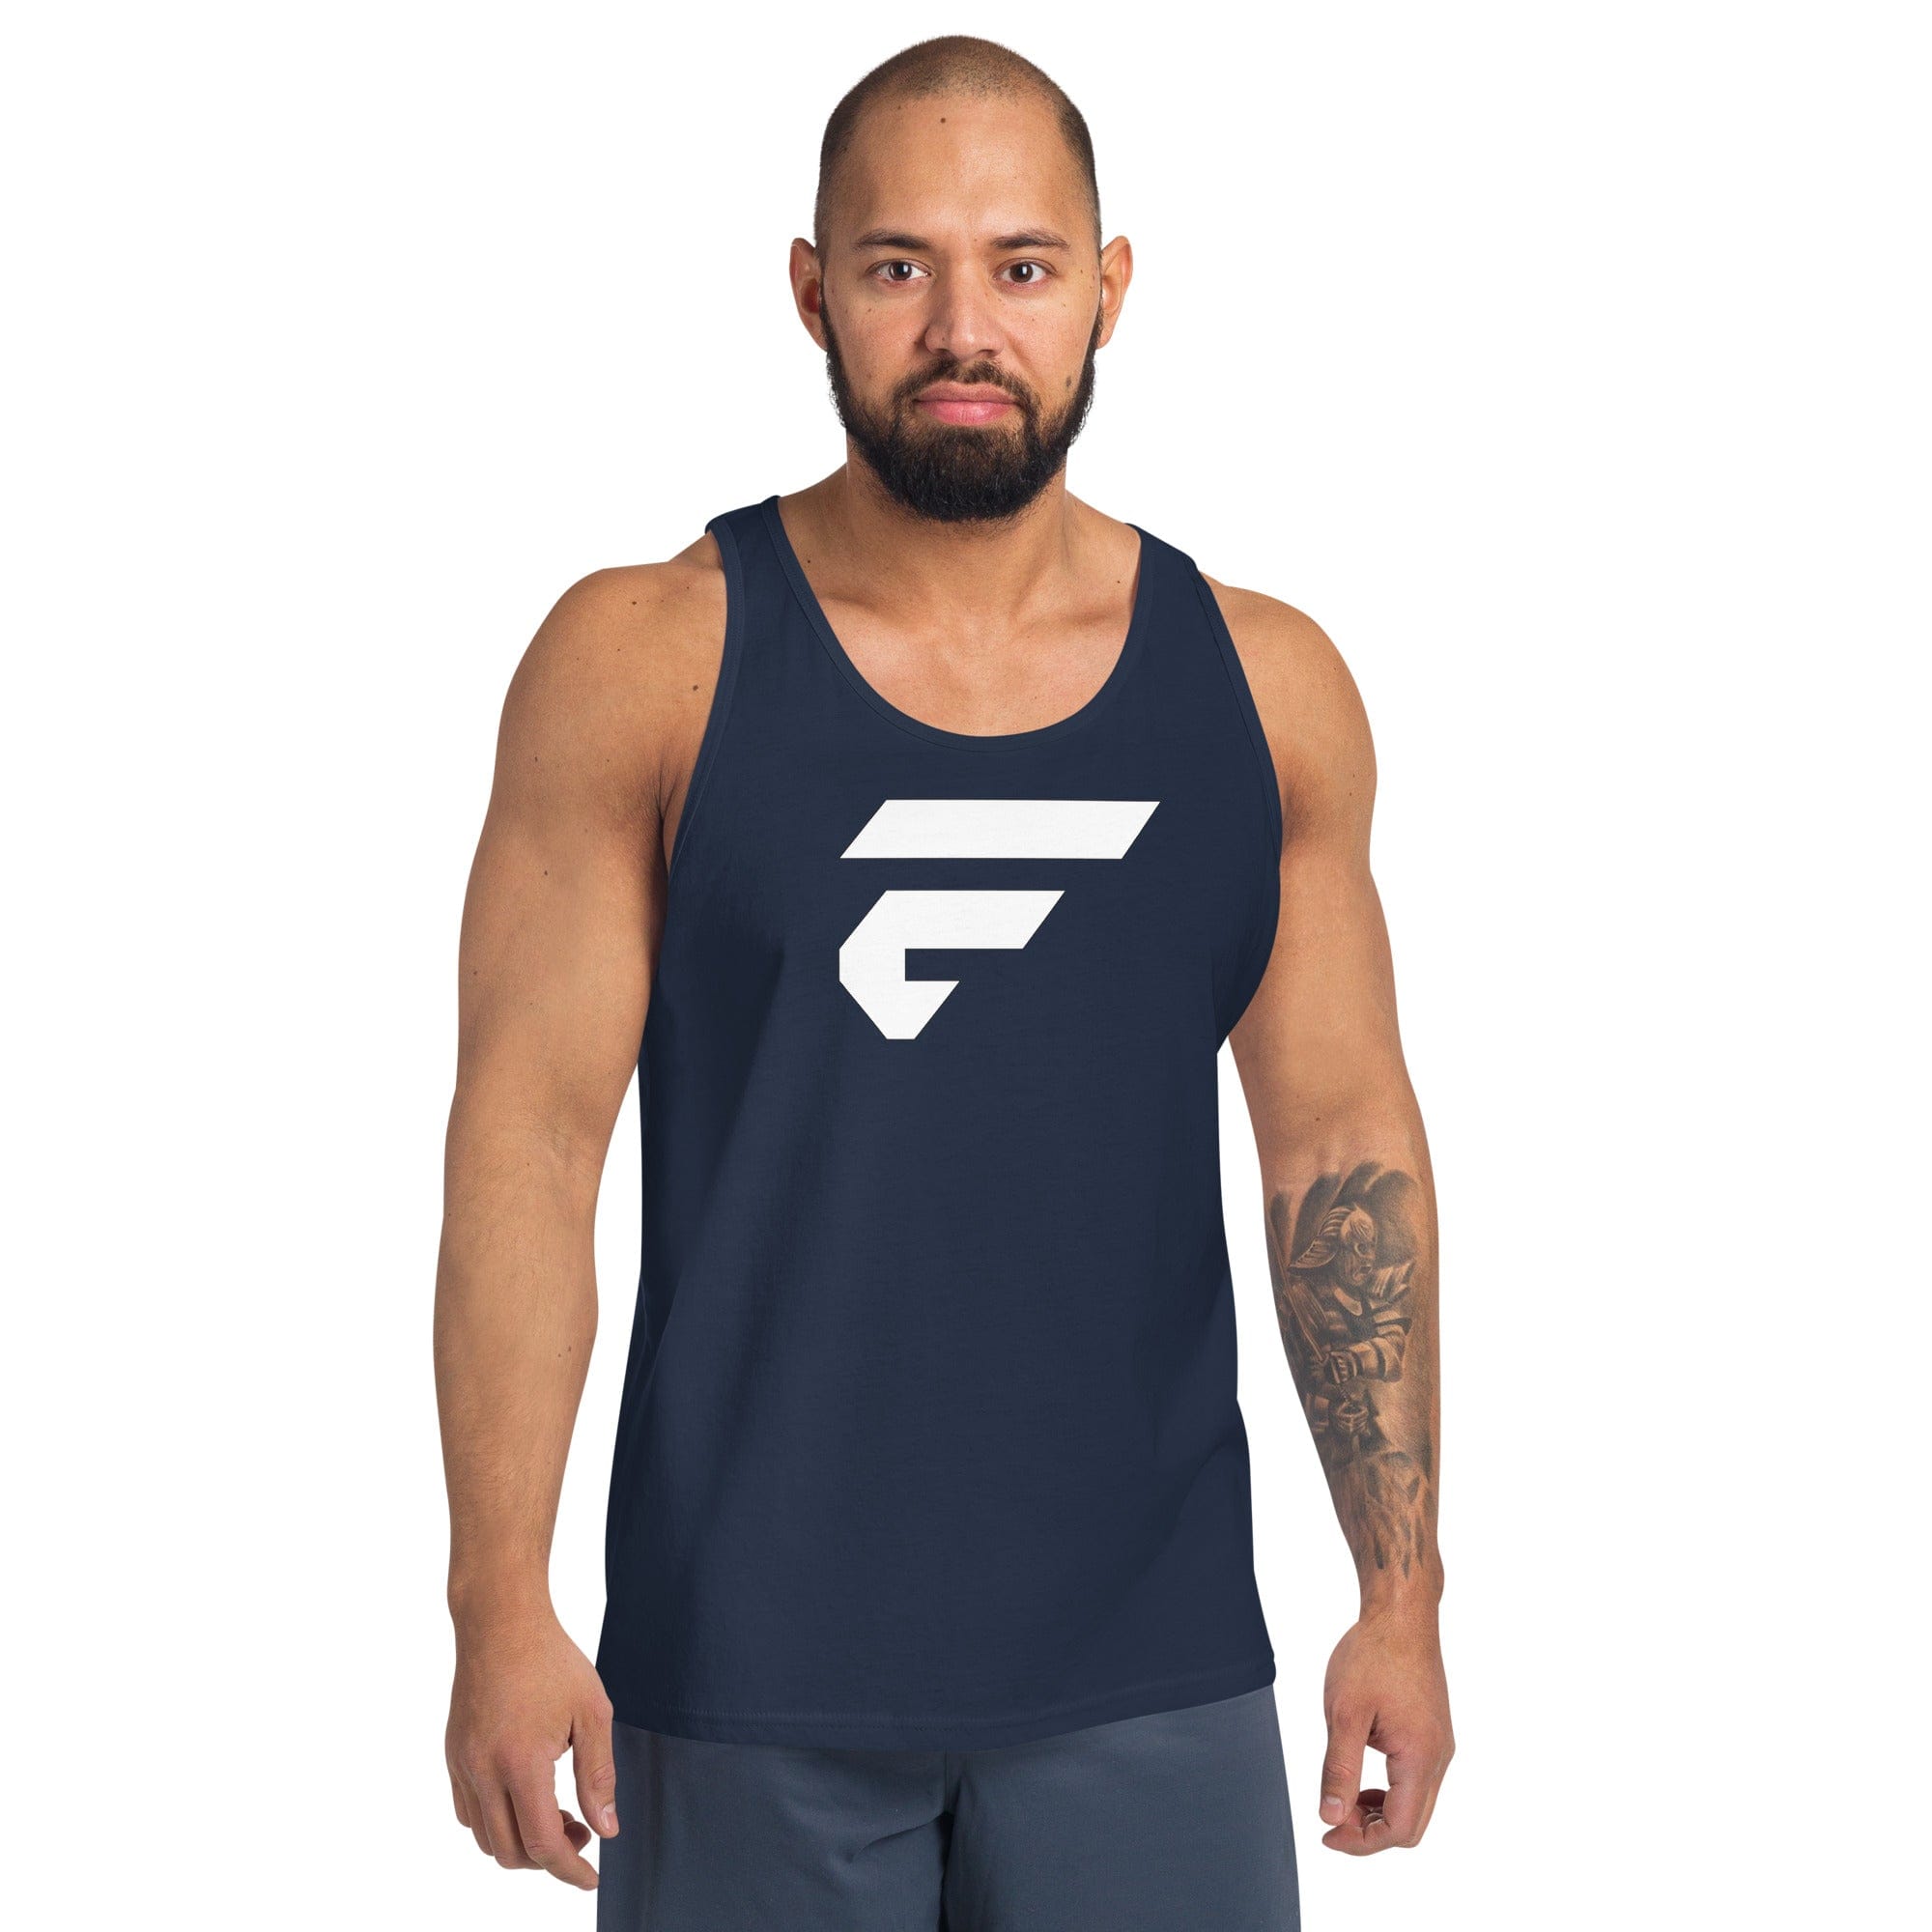 Navy unisex cotton tank top with Fire Cornhole F logo in white